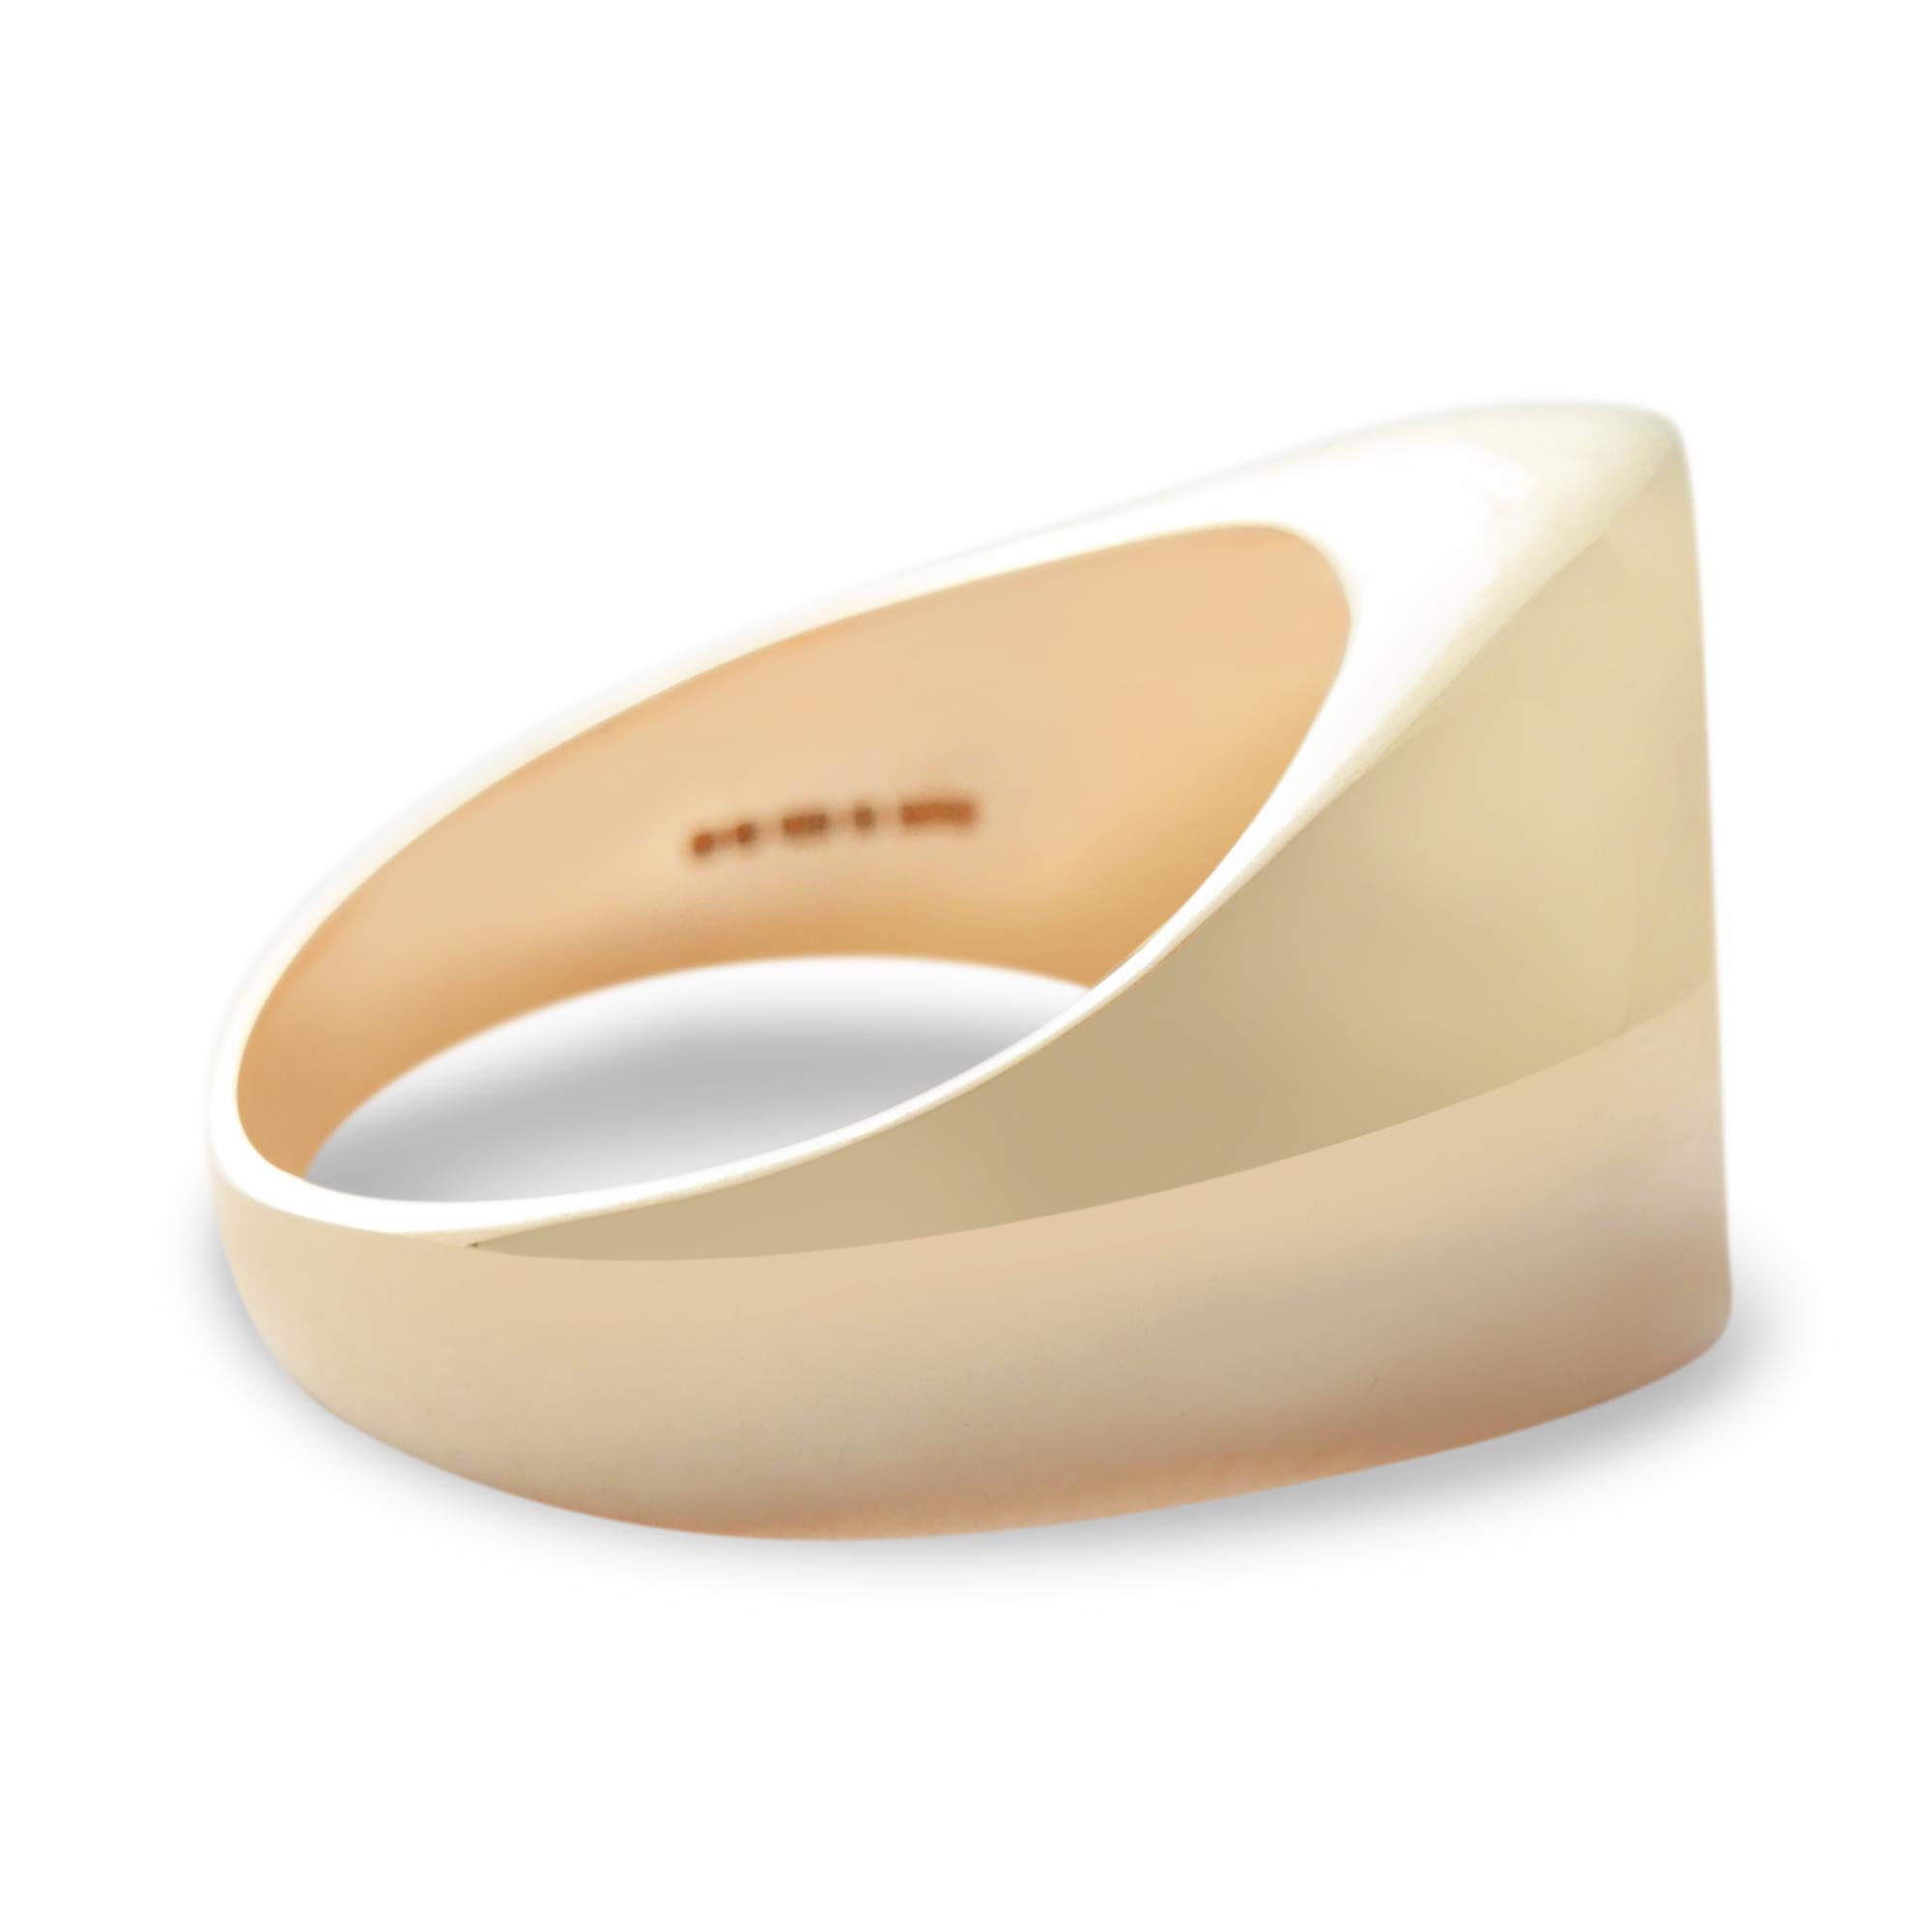 This curvaceous, contemporary take on the classic signet ring is crafted from solid 9-carat yellow gold with a high-polish finish.  The ring is in stock in a UK size L 1/2 (equivalent to US size 5 7/8 or European size 52 1/2) and can be resized upon